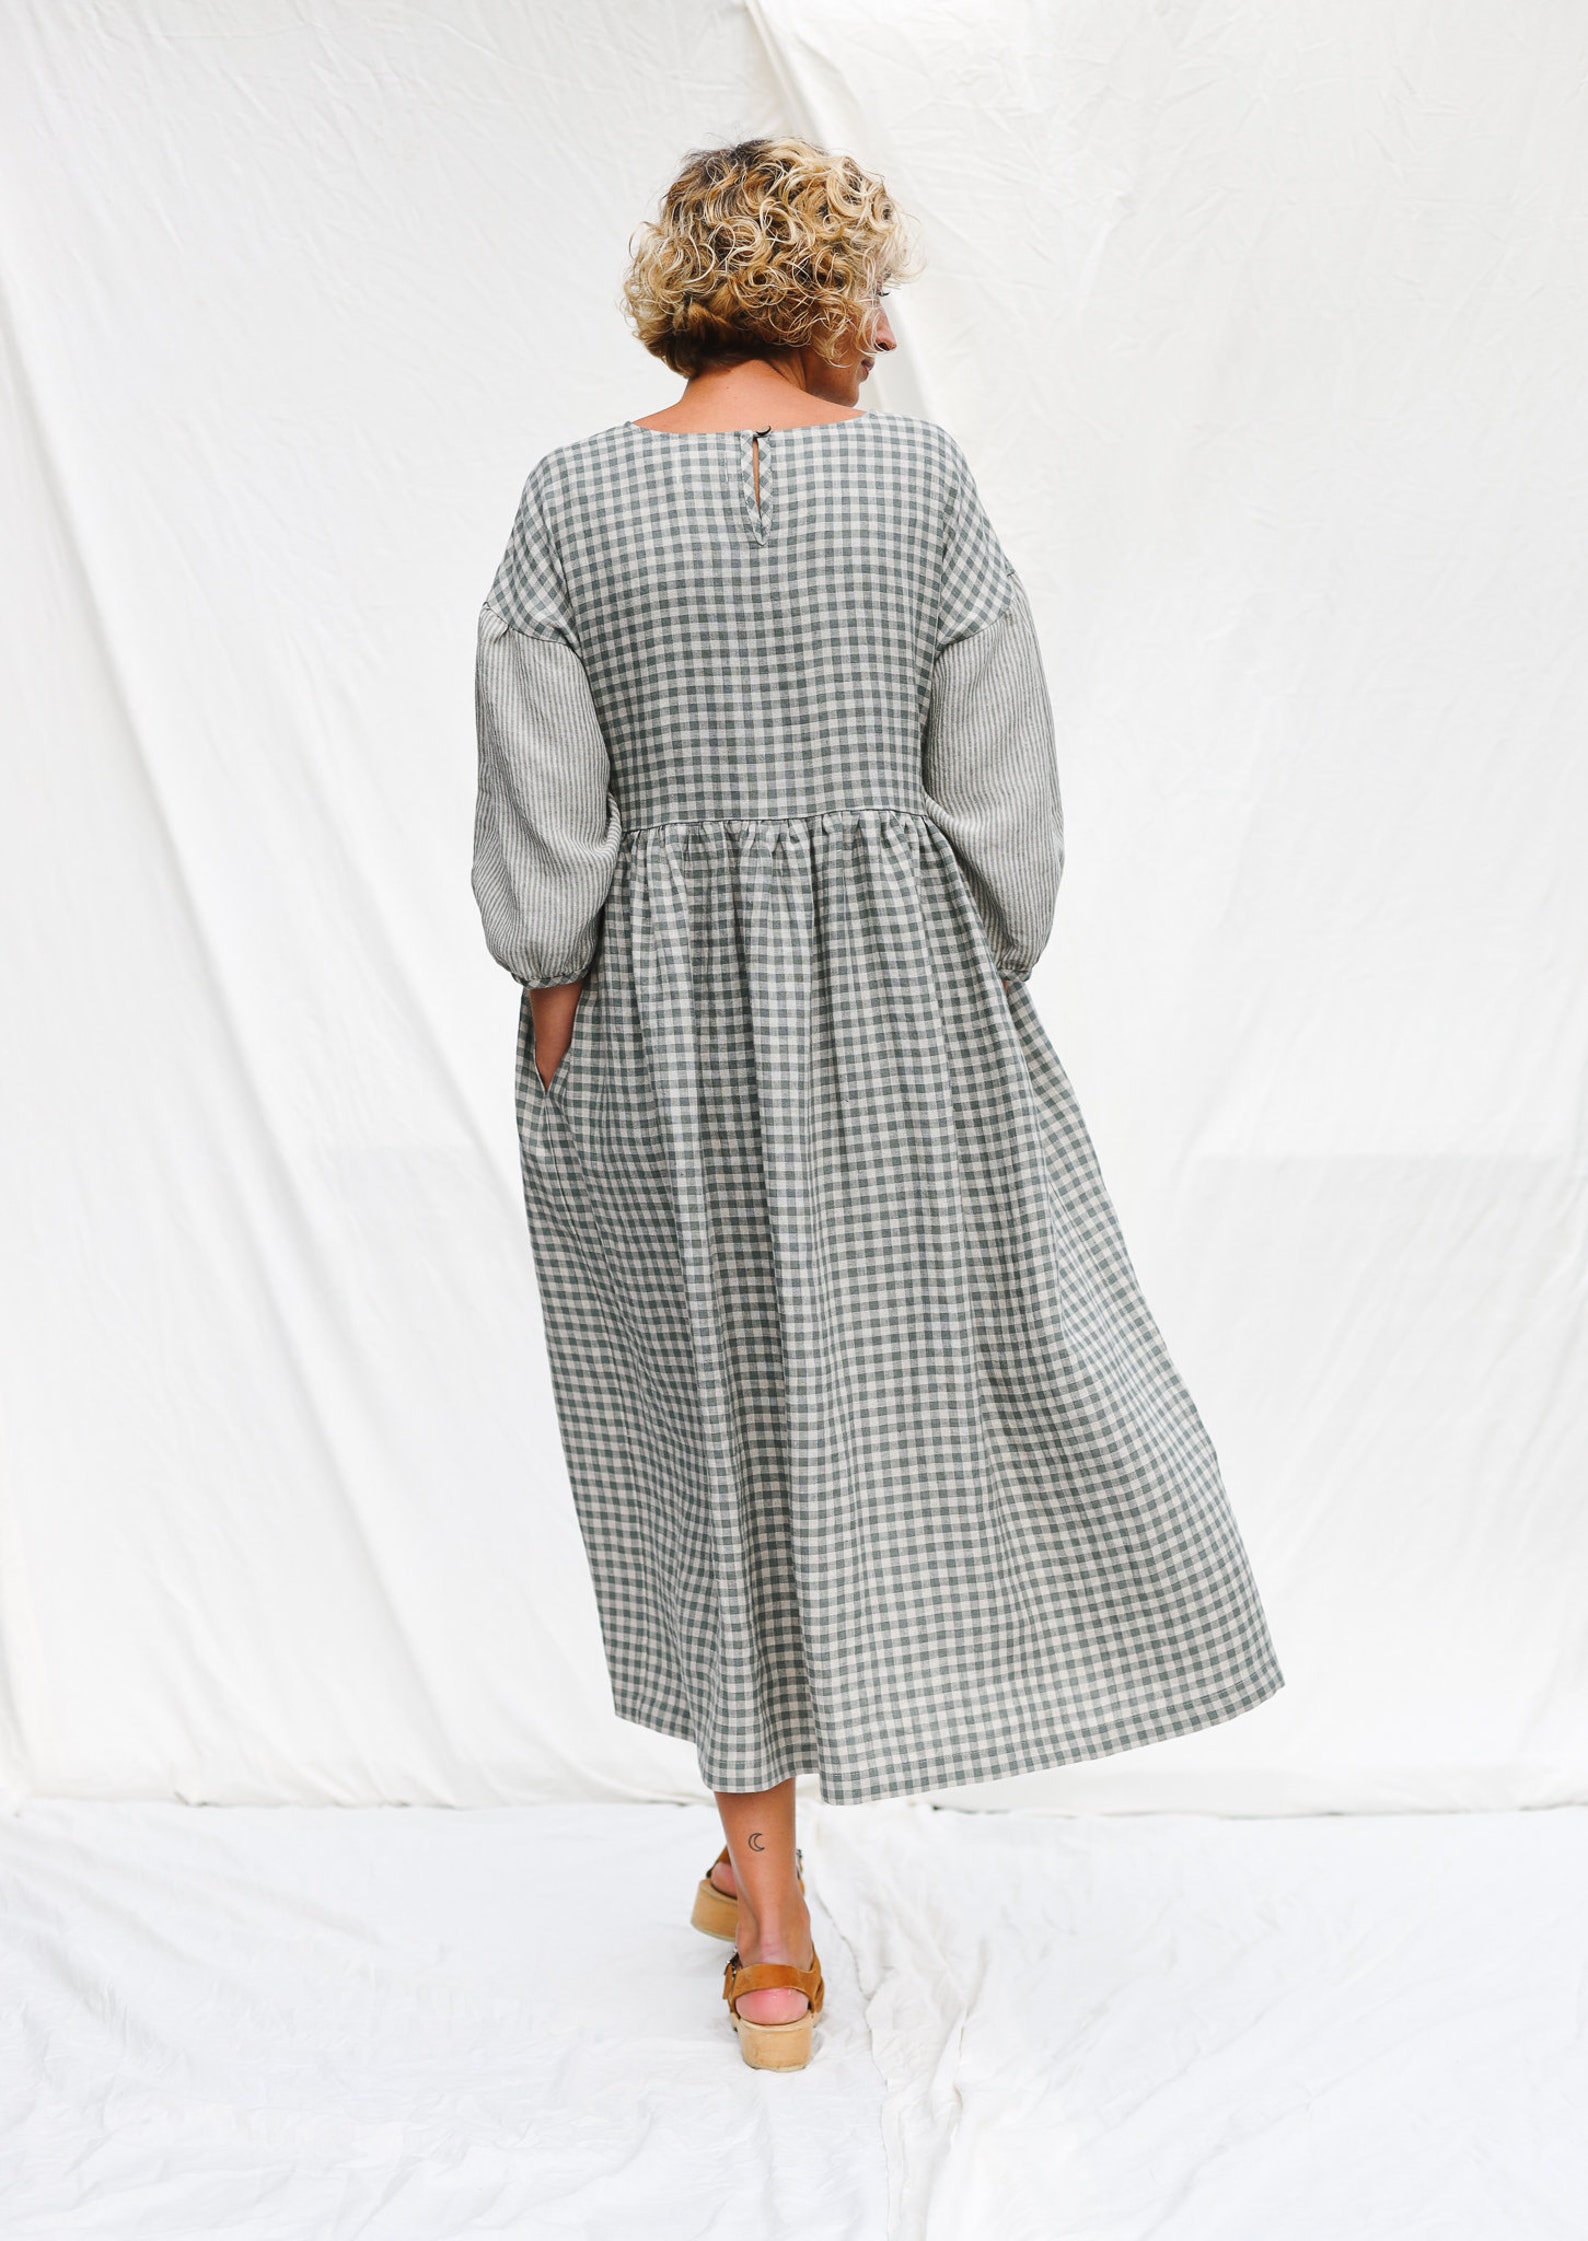 Gingham Linen Dress With Contrasting Striped Puffy Sleeves - Etsy